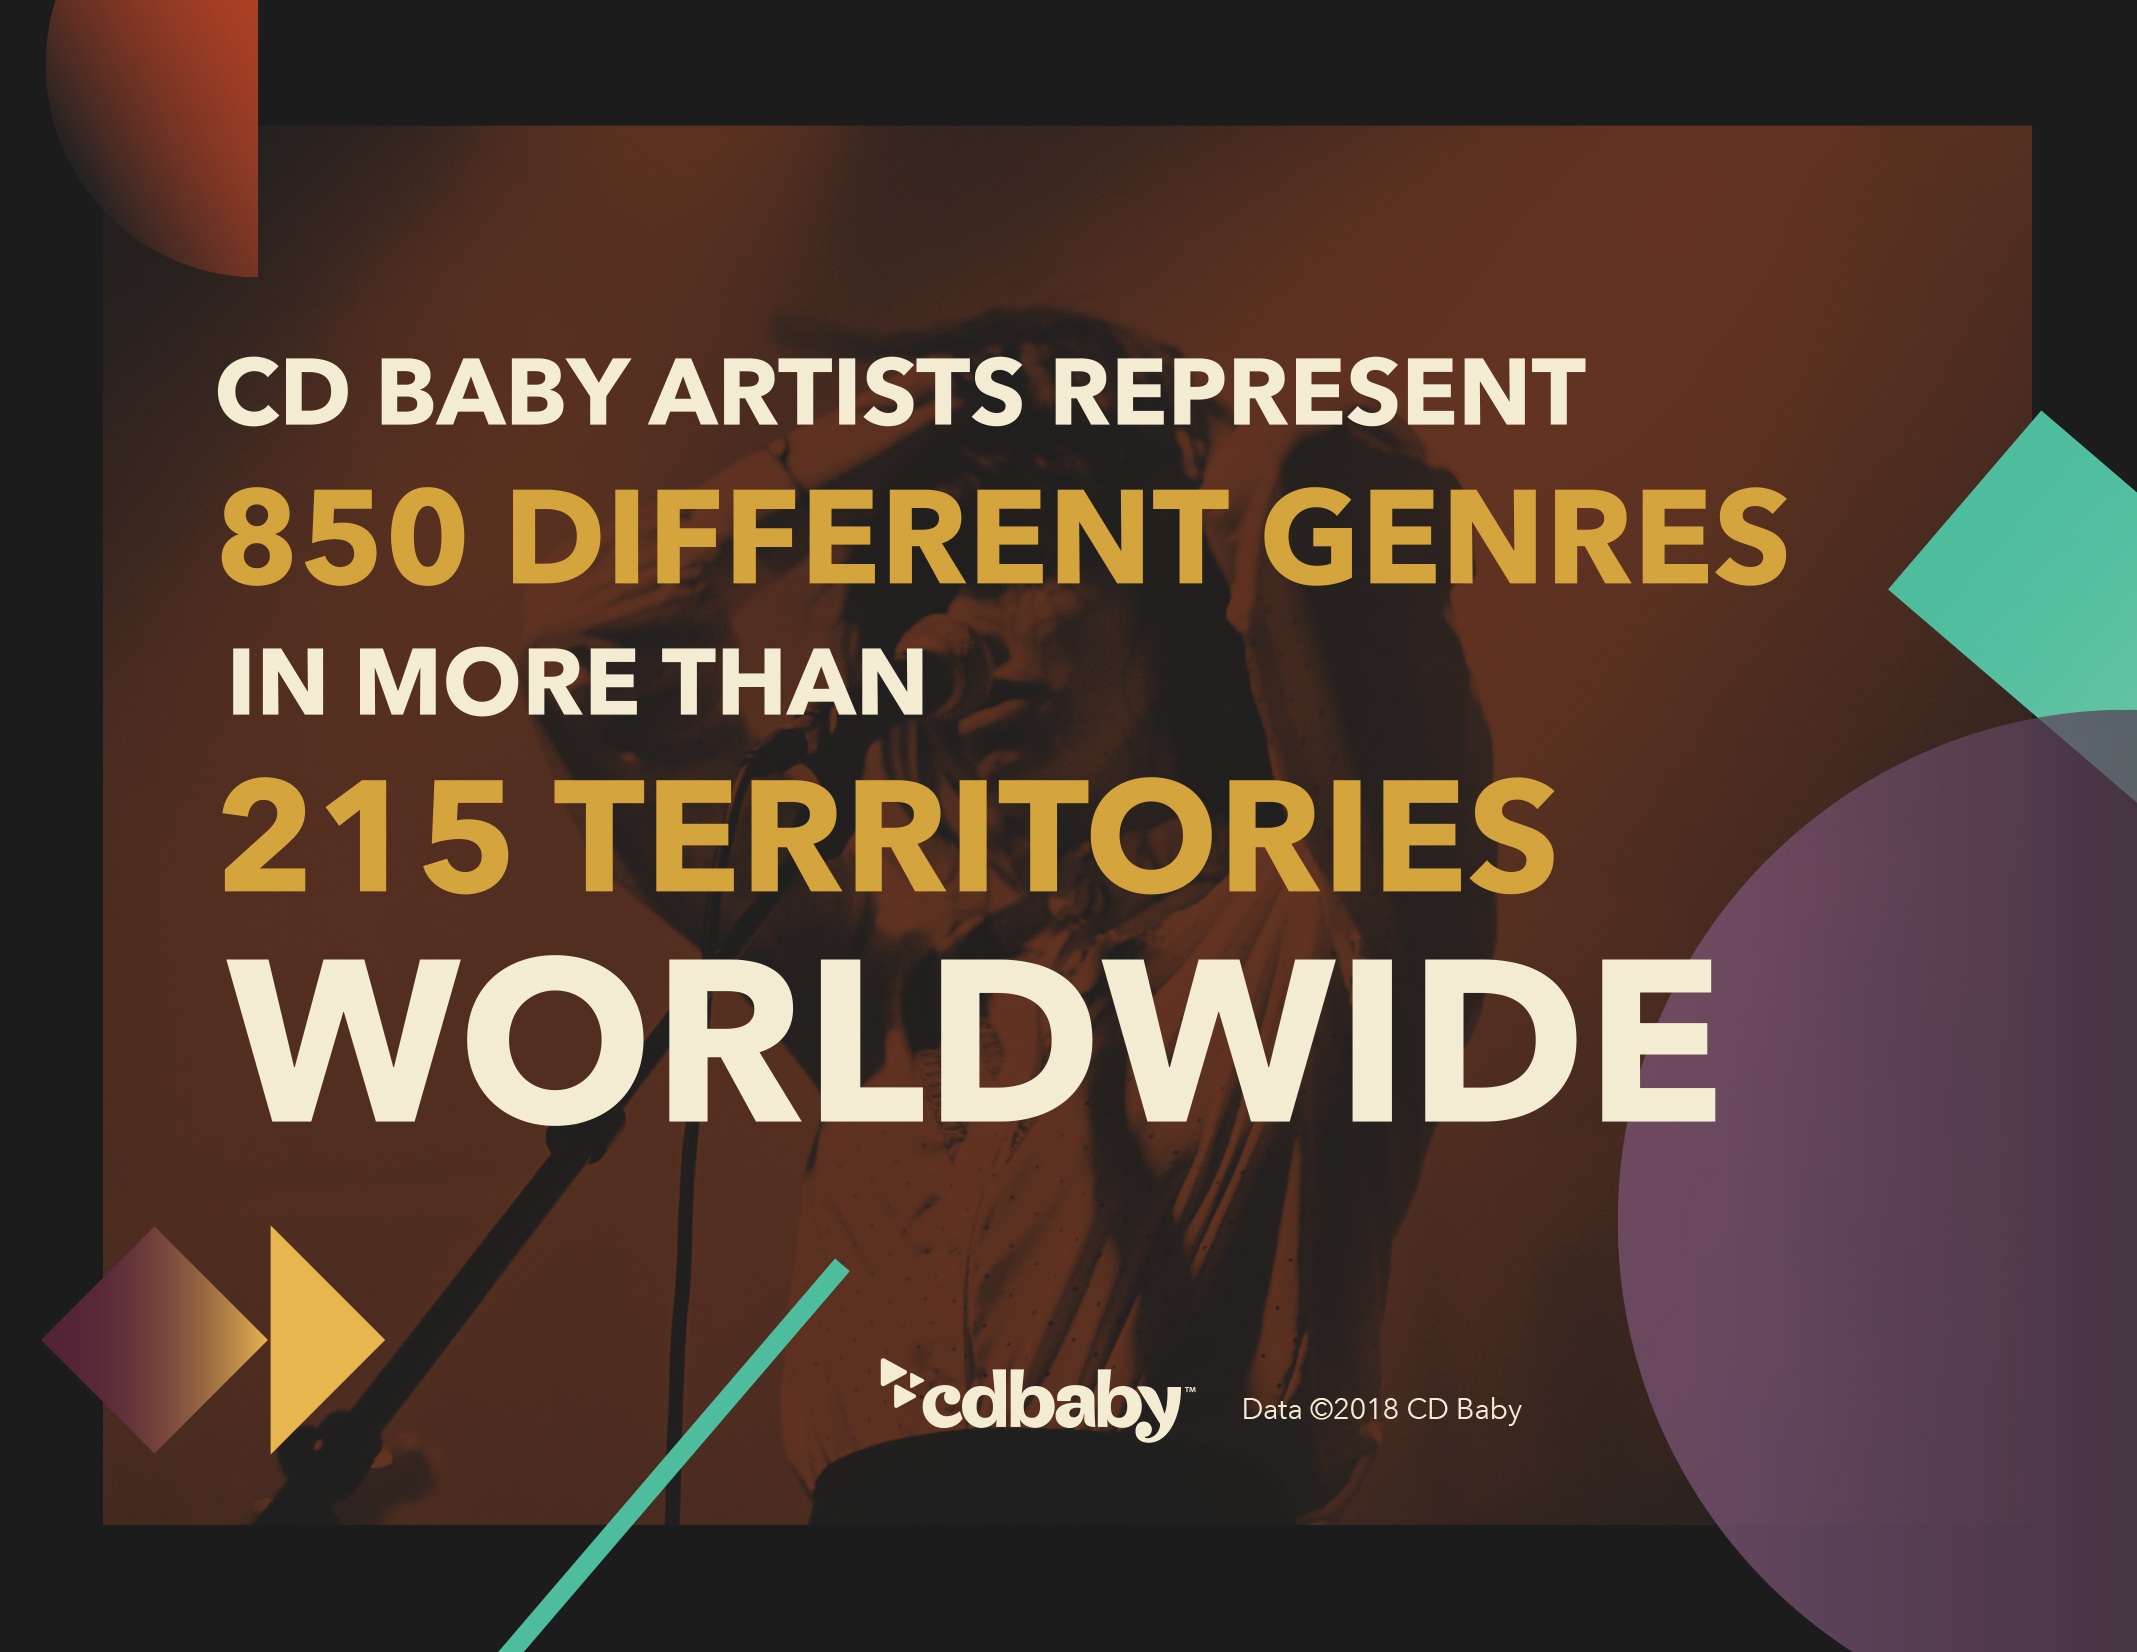 The breadth of CD Baby's music catalog